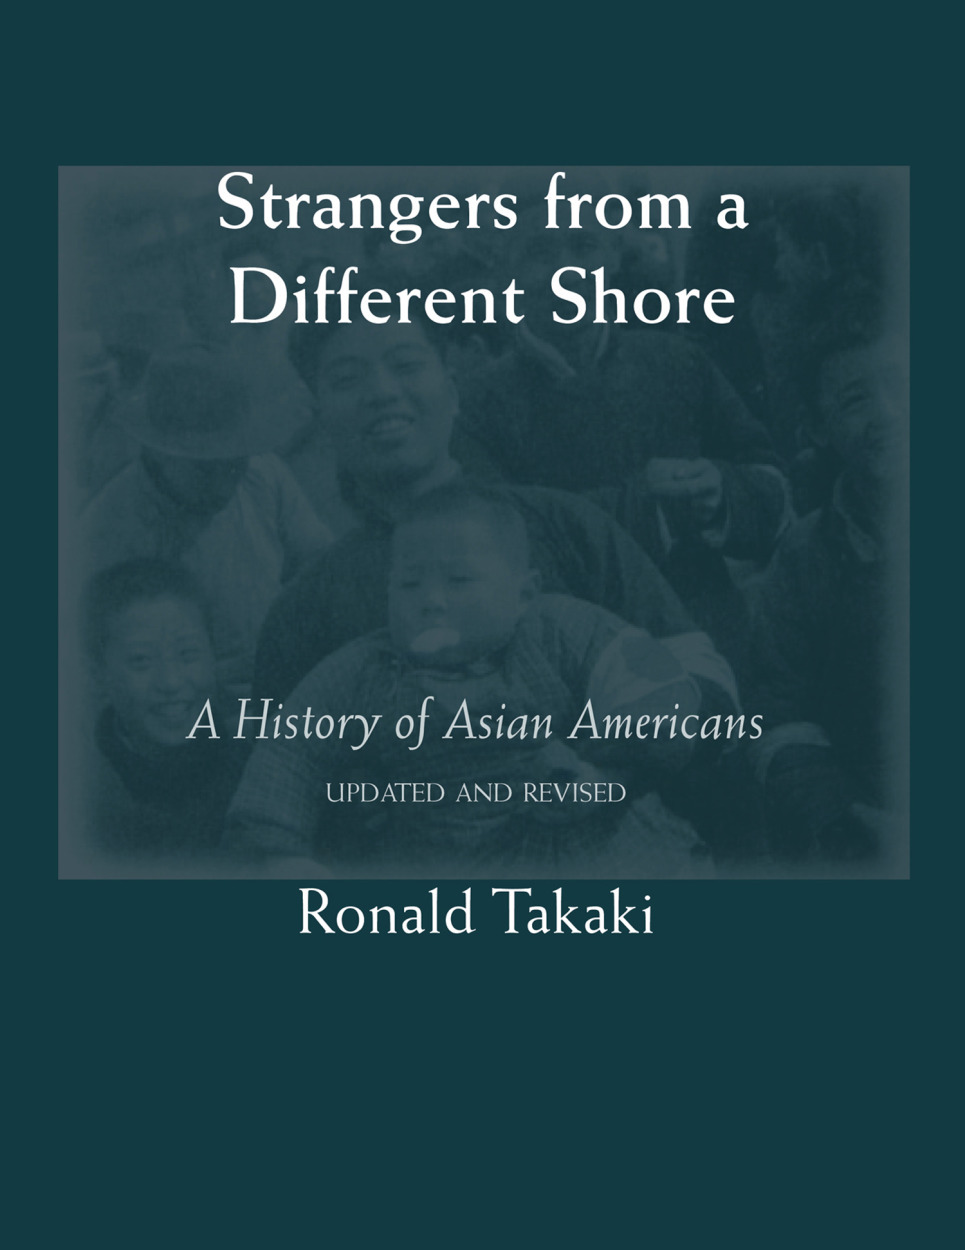 strangers from a different shore by ronald takaki